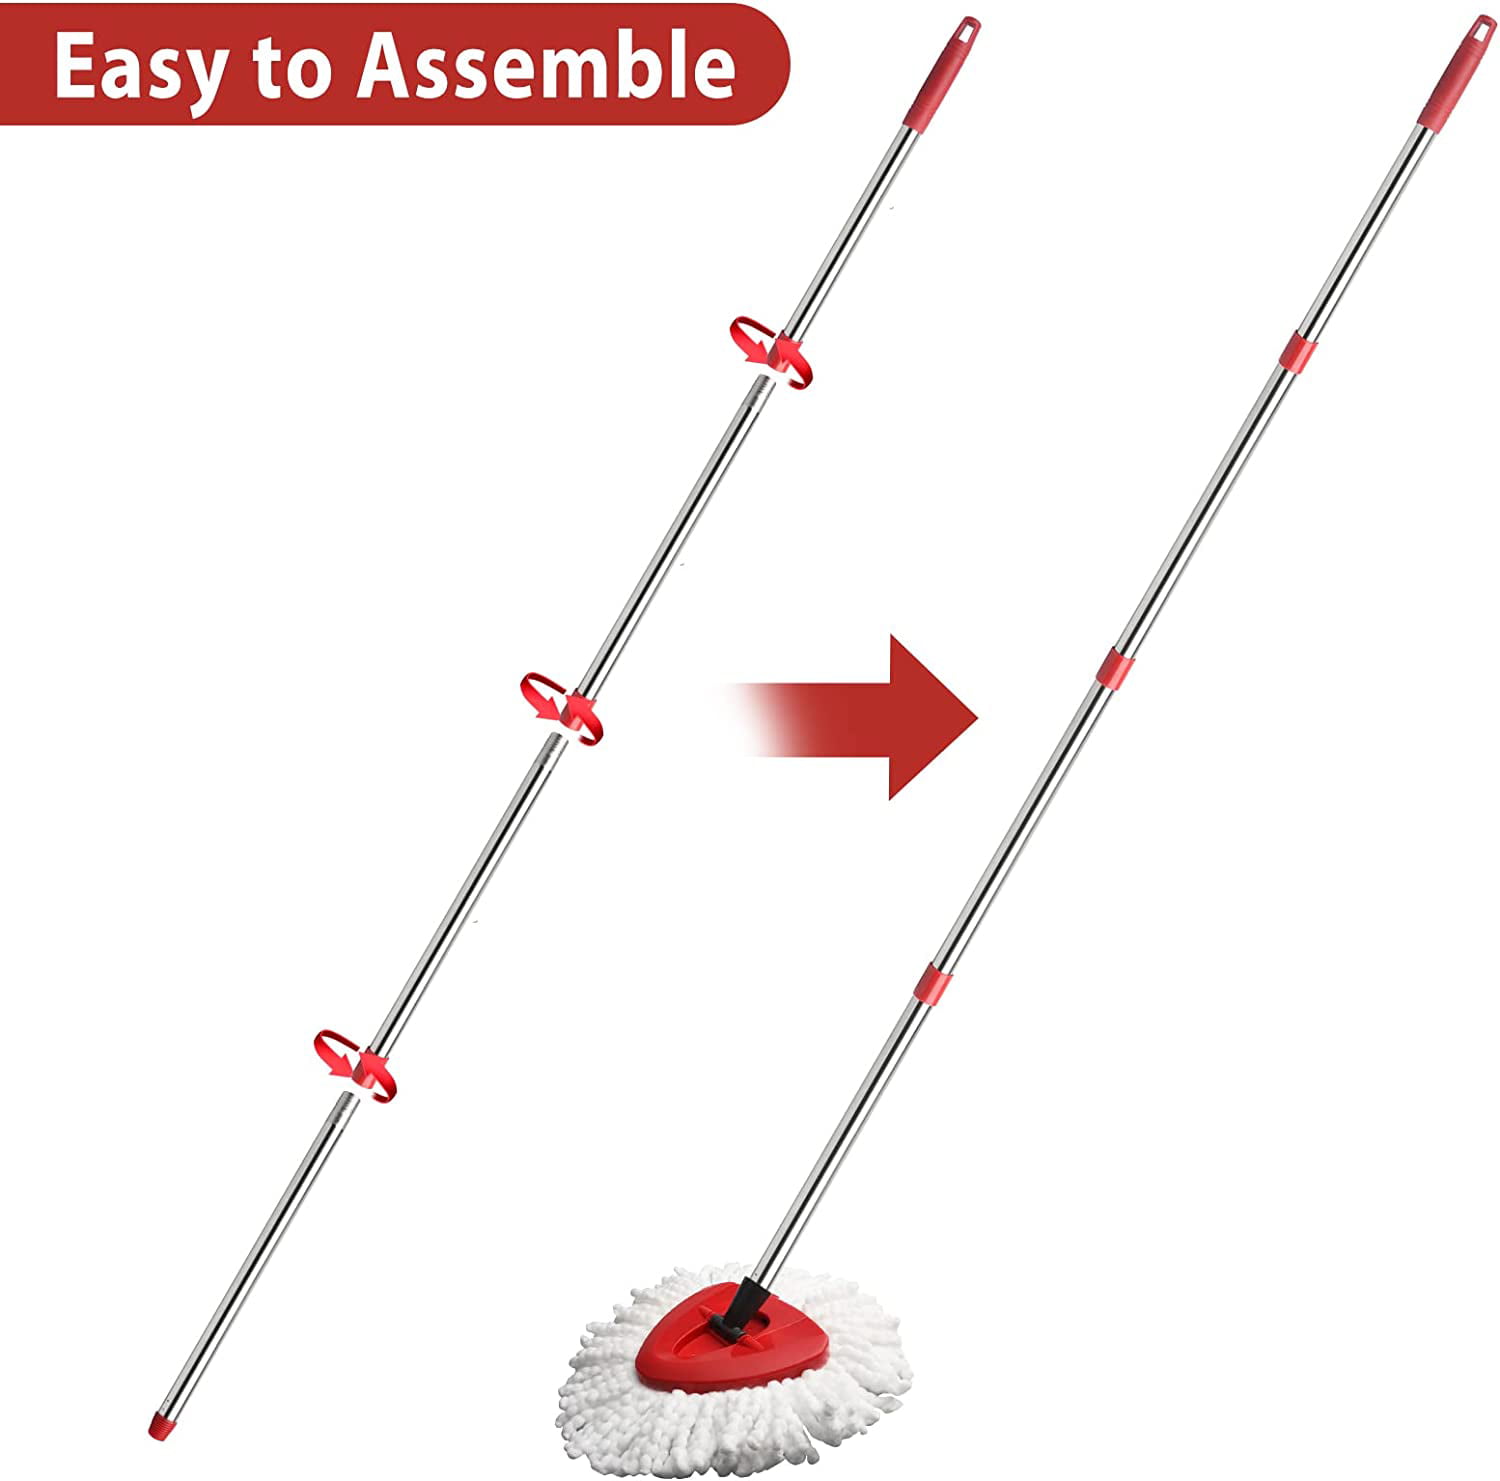 Qulable Spin Mop Replacement Handle - Mop Stick Compatible with O-Cedar  Spin Mop, 4-Section 30 to 58 Mop Handle Replacement Stick, EasyWring Mop